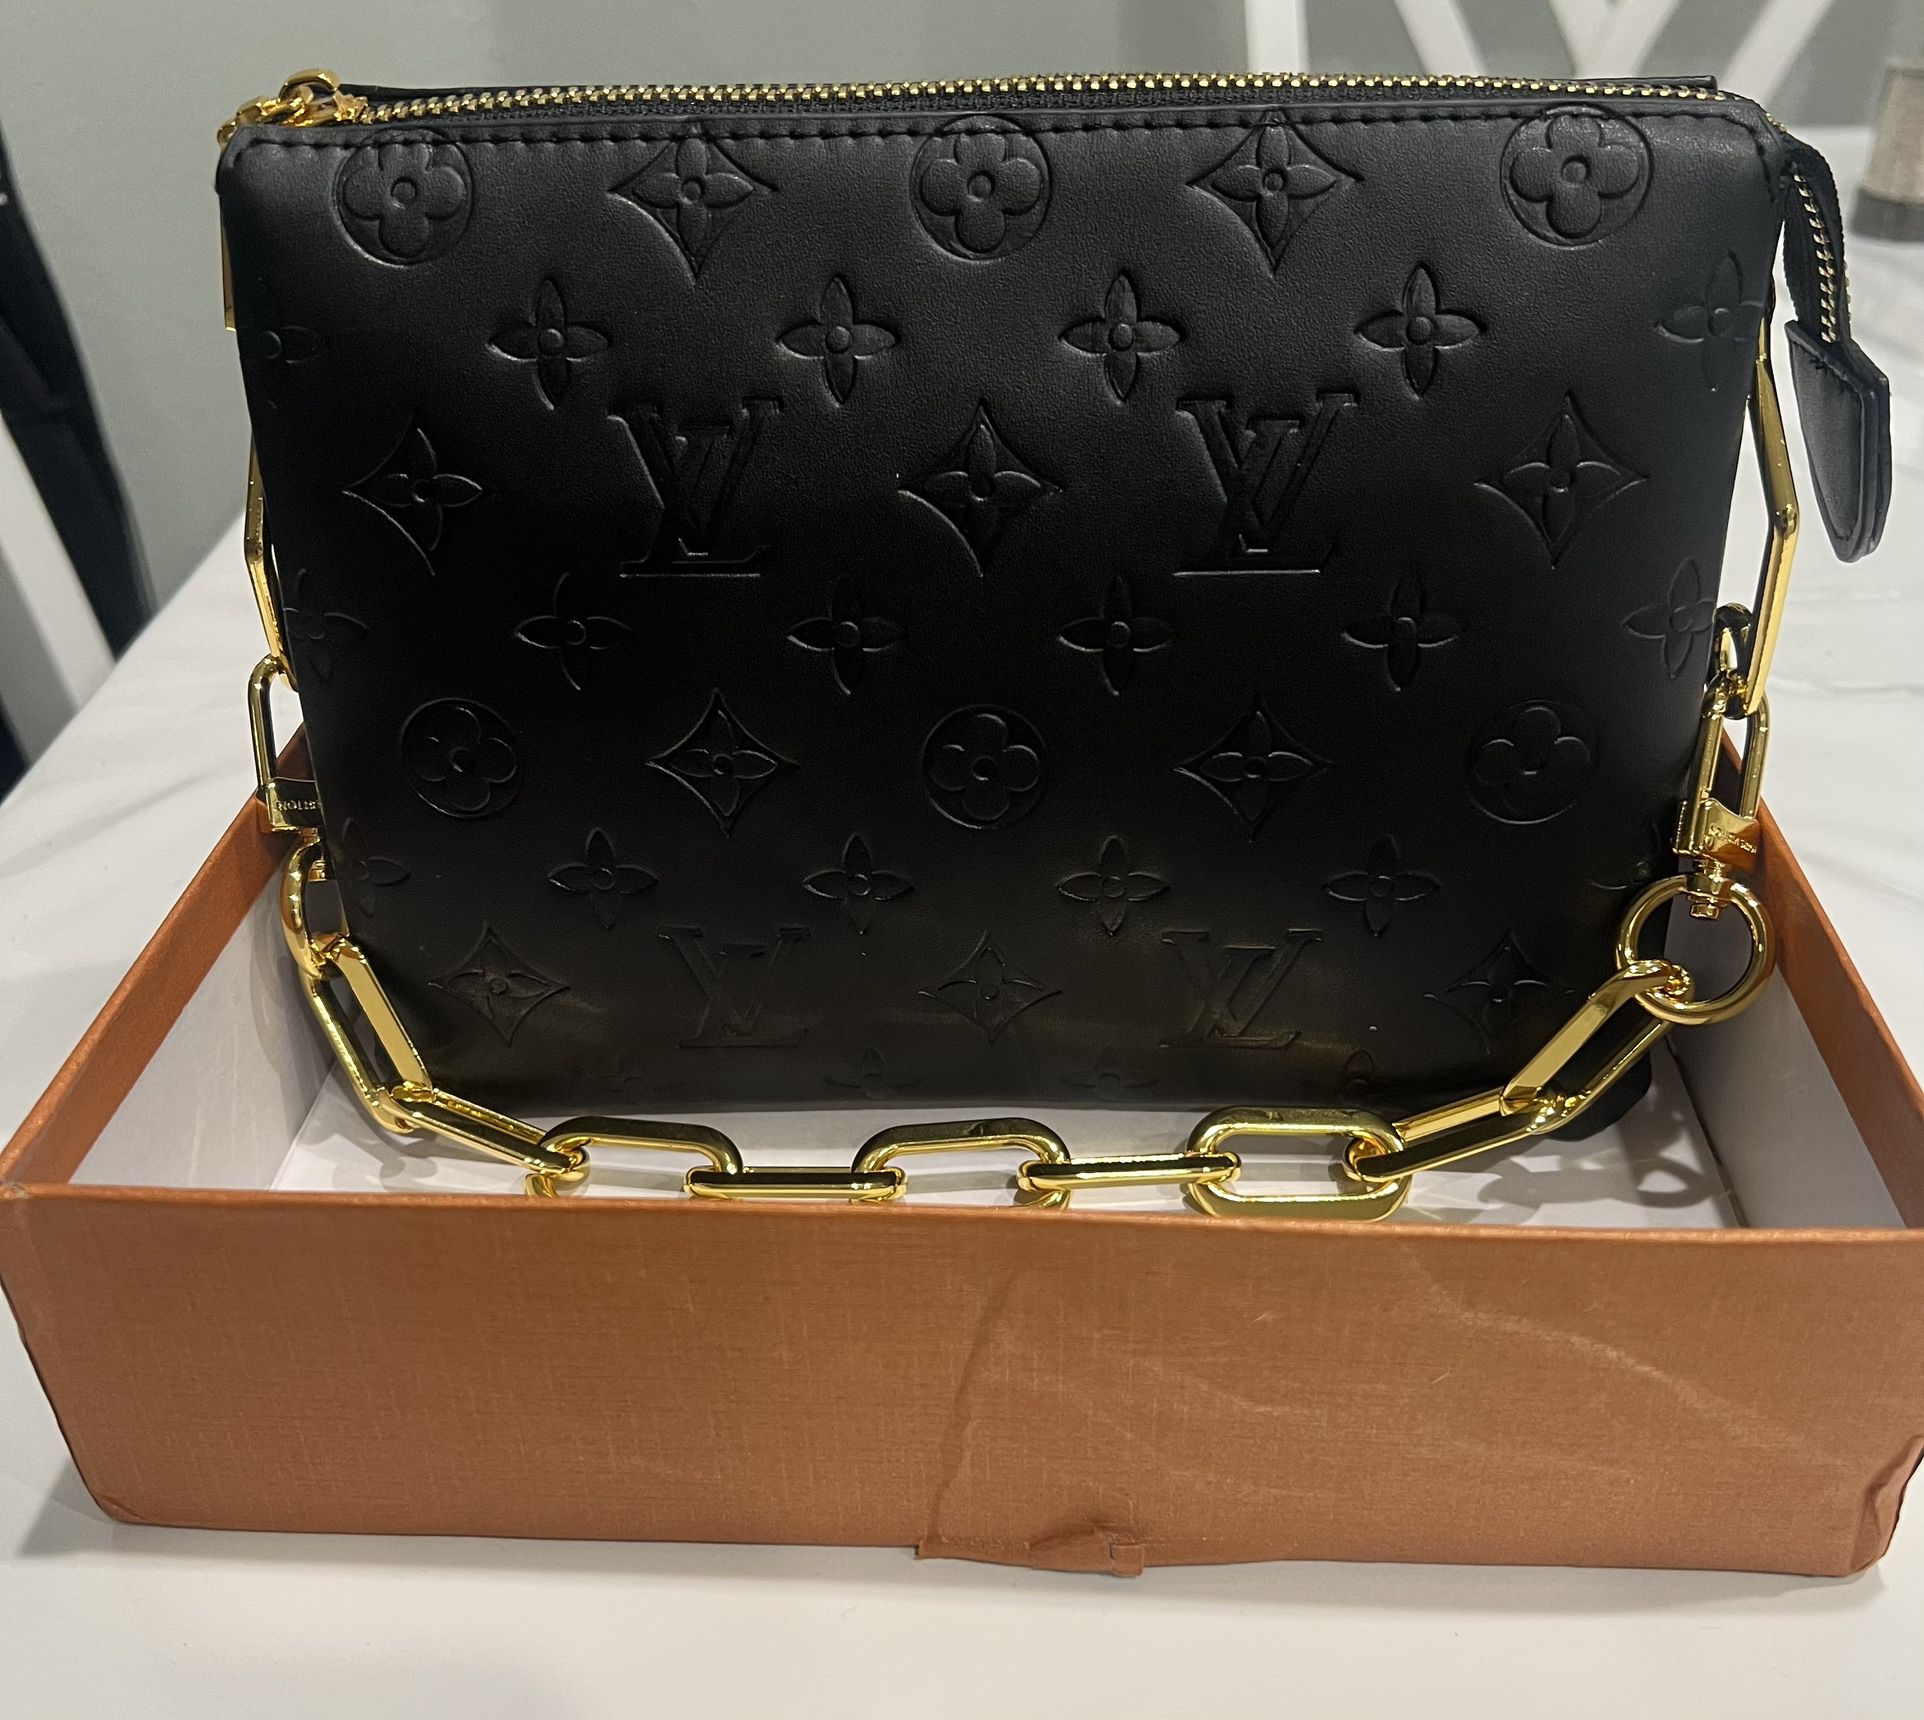 Authentic Chanel Le Boy Calfskin leather Cross Body Bag Black Gold Chain  medium for Sale in Los Angeles, CA - OfferUp